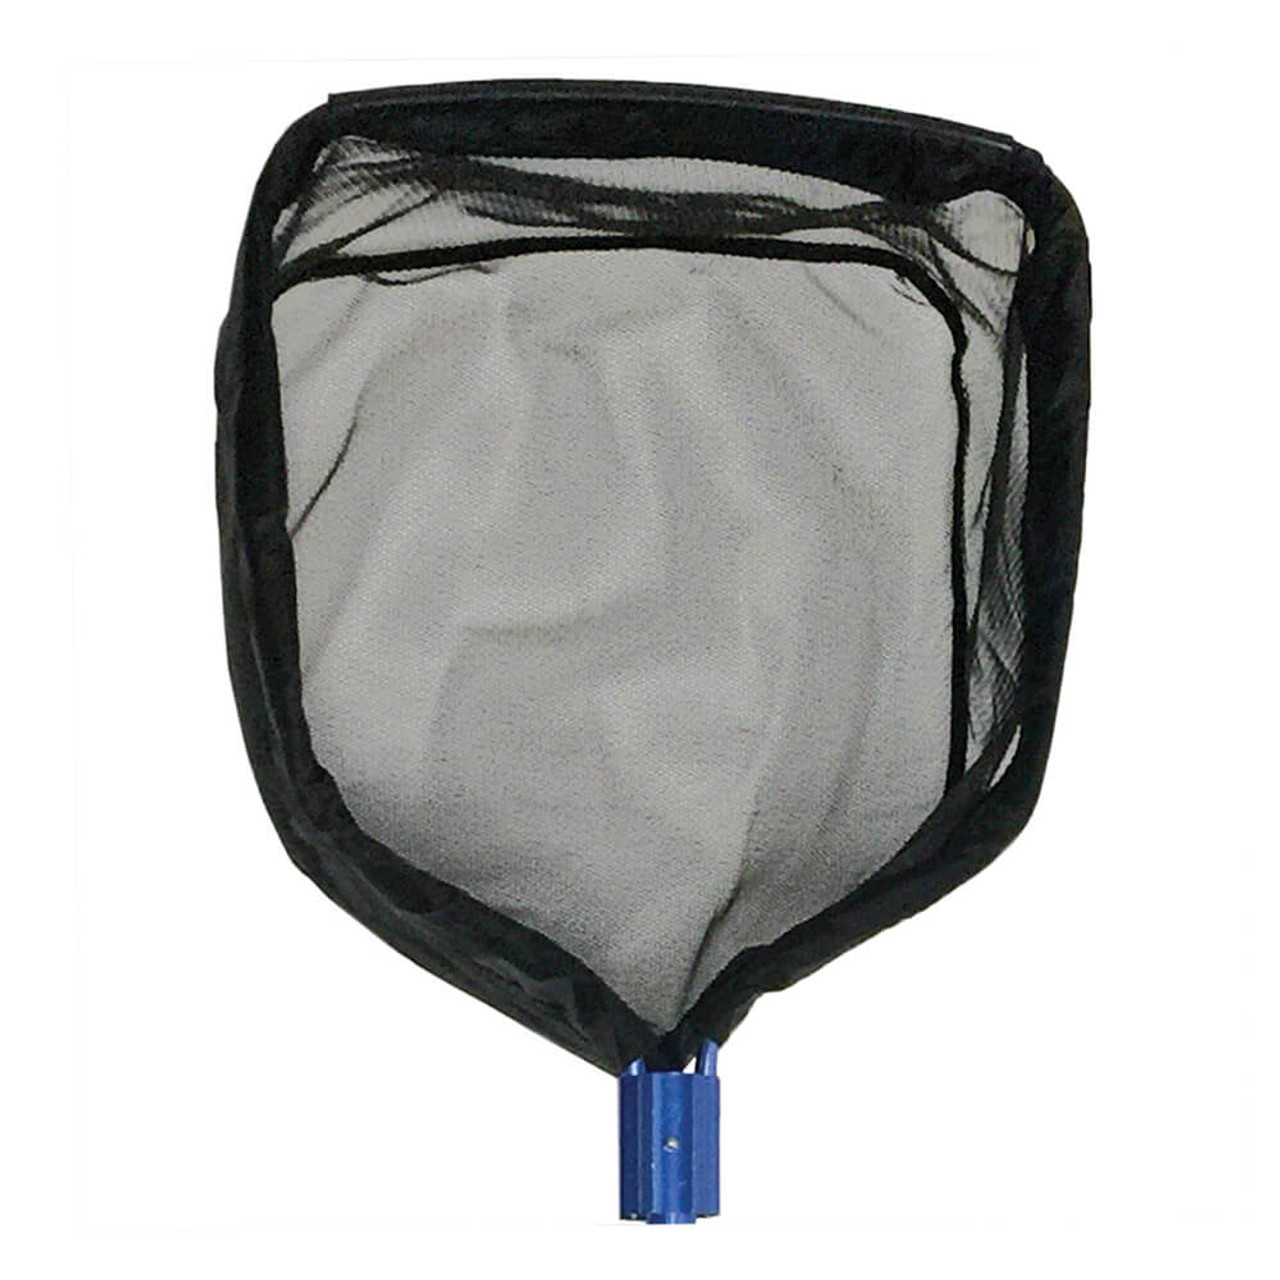 The Pond Guy Heavy-Duty Fish Net Only